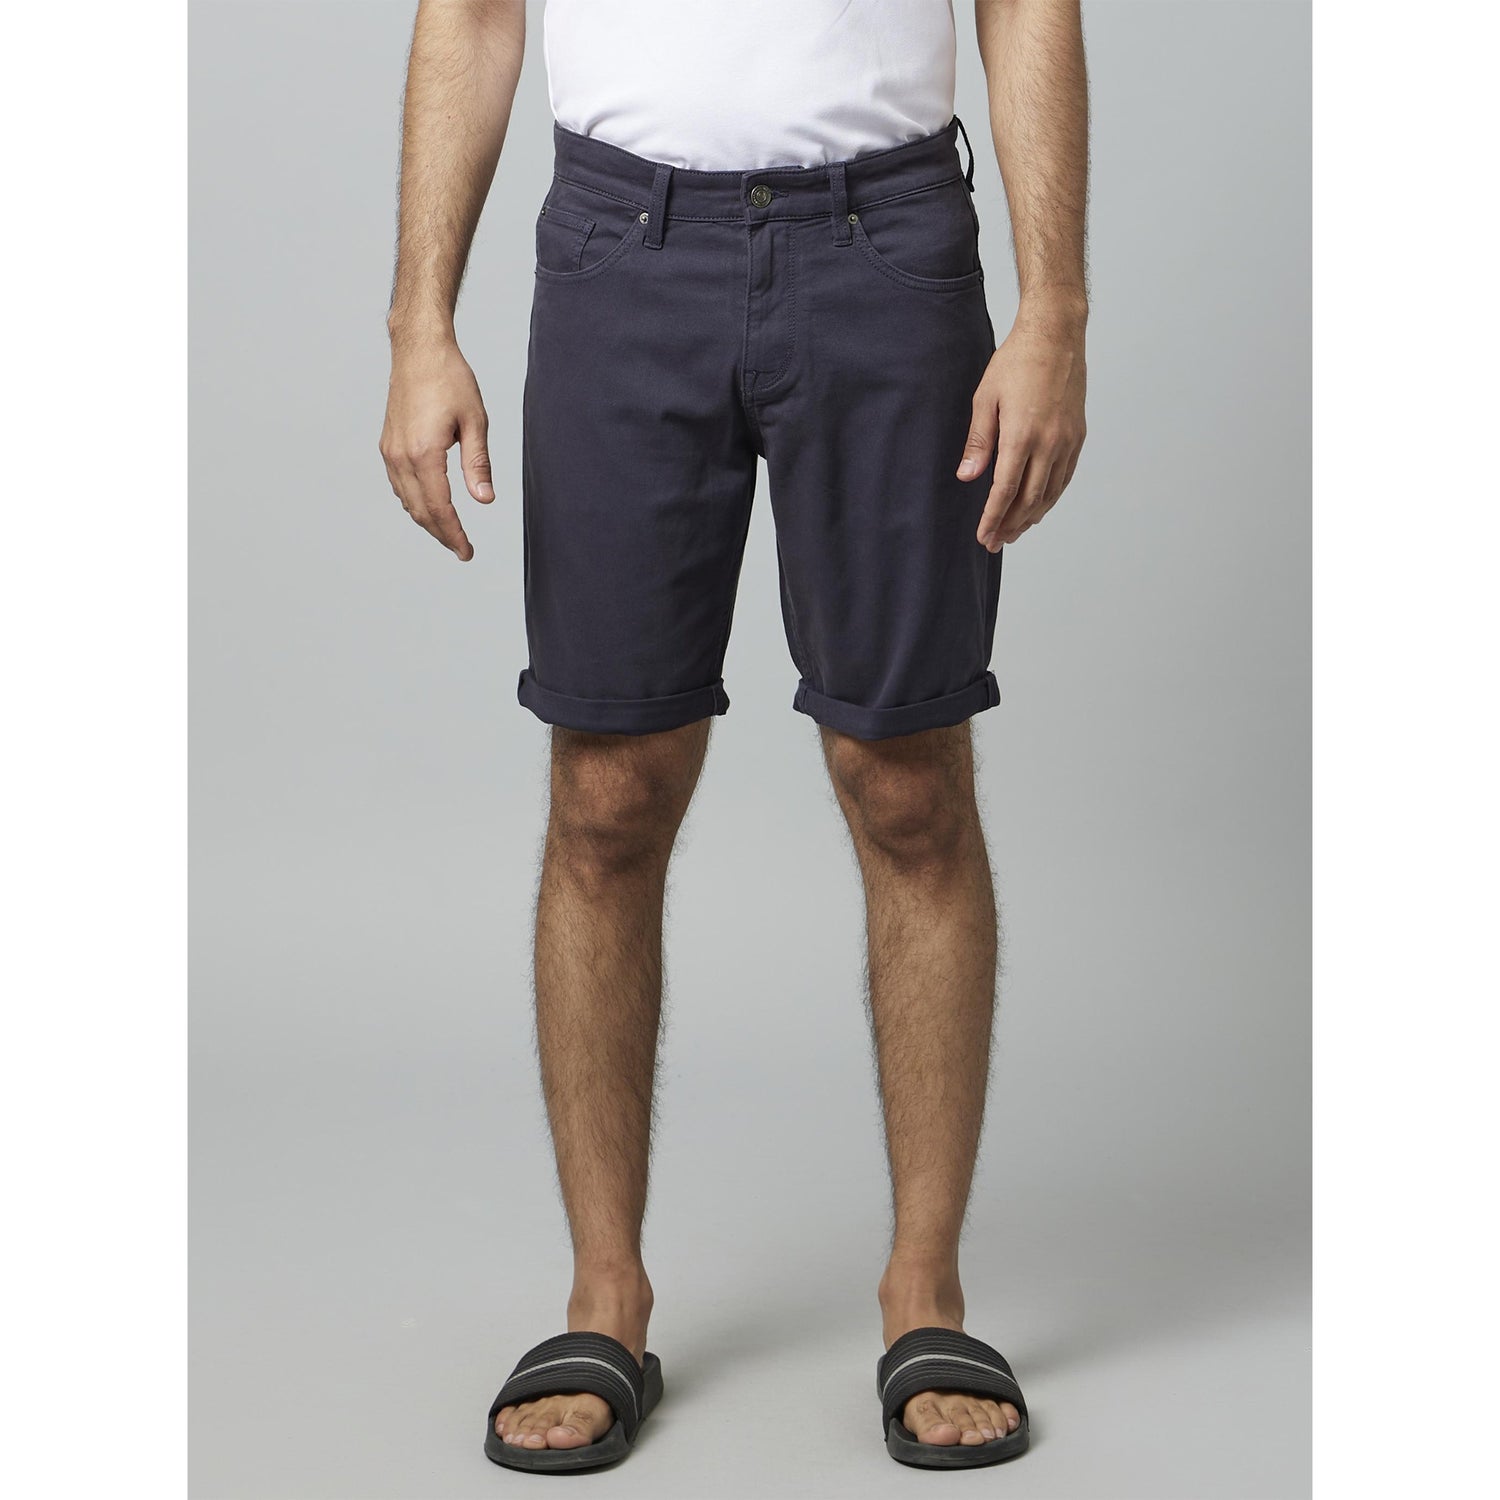 Navy Blue Solid Mid-Rise Cotton Shorts (MOHITOBM1)